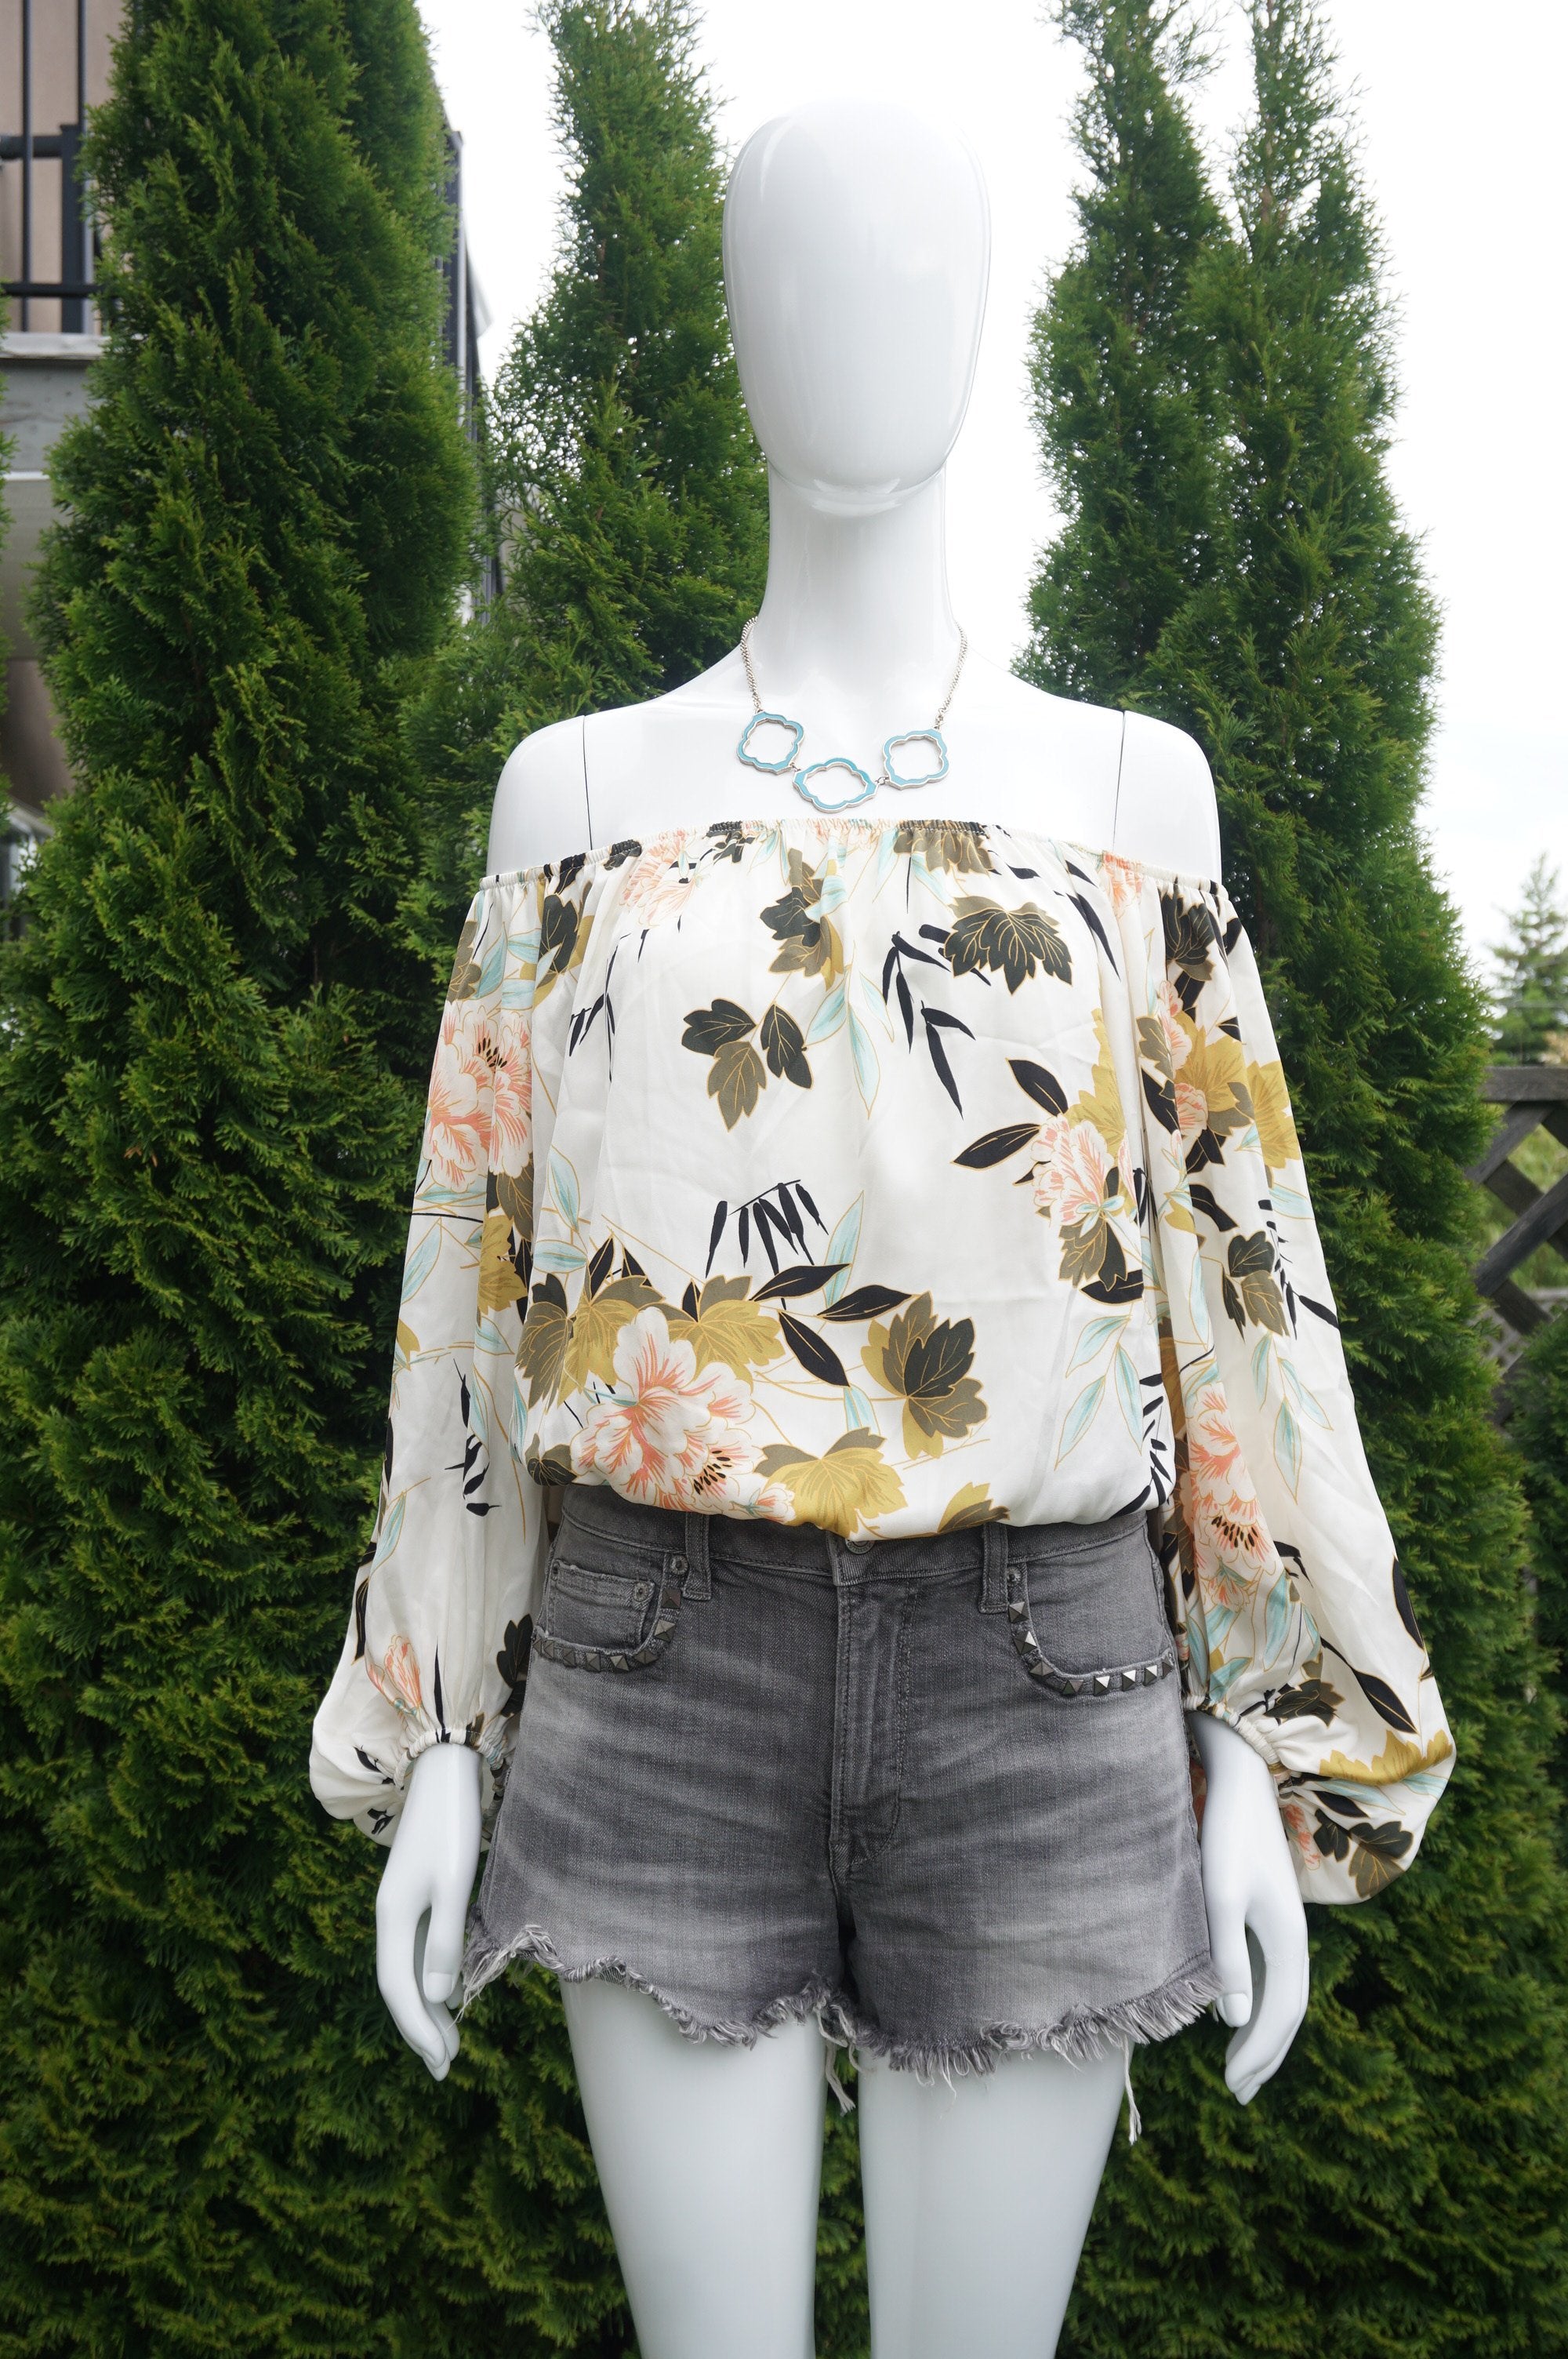 Zara Floral Off Shoulder Long Sleeve Bodysuit Top, Super comfy and stretchy bodysuit top. A date in the summer maybe?, White, 85% Polyester, 15% Elastane, women's Tops, women's White Tops, Zara women's Tops, summer top, bodysuit top, floral bodysuit, off shoulder bodysuit, long sleeve bodysuit.